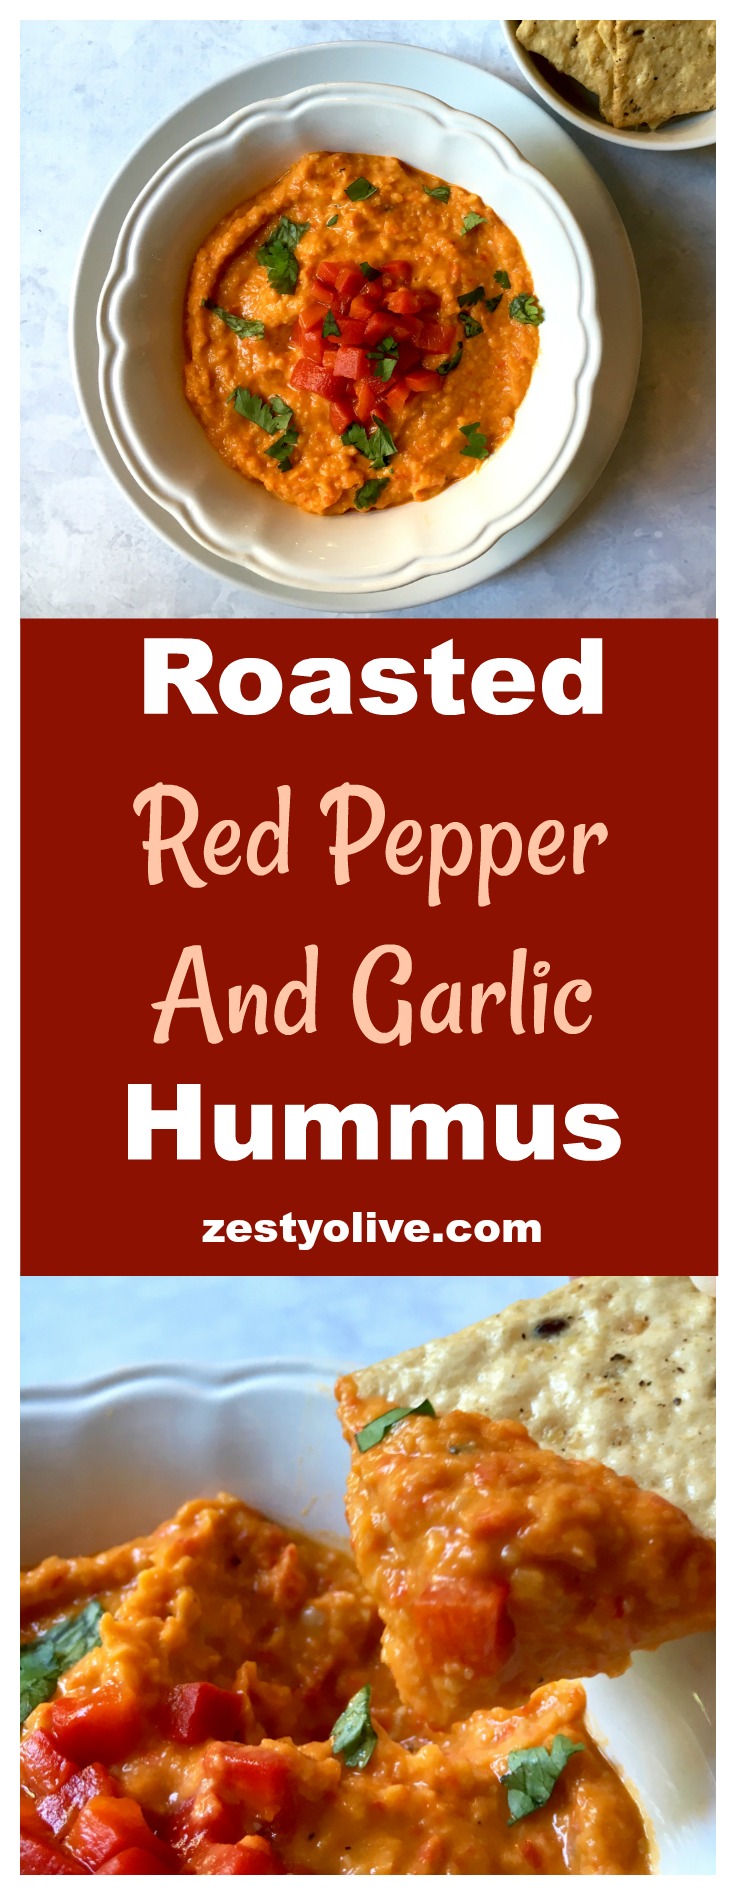 Roasted Red Pepper And Garlic Hummus - a quick and easy appetizer dip for hummus lovers!